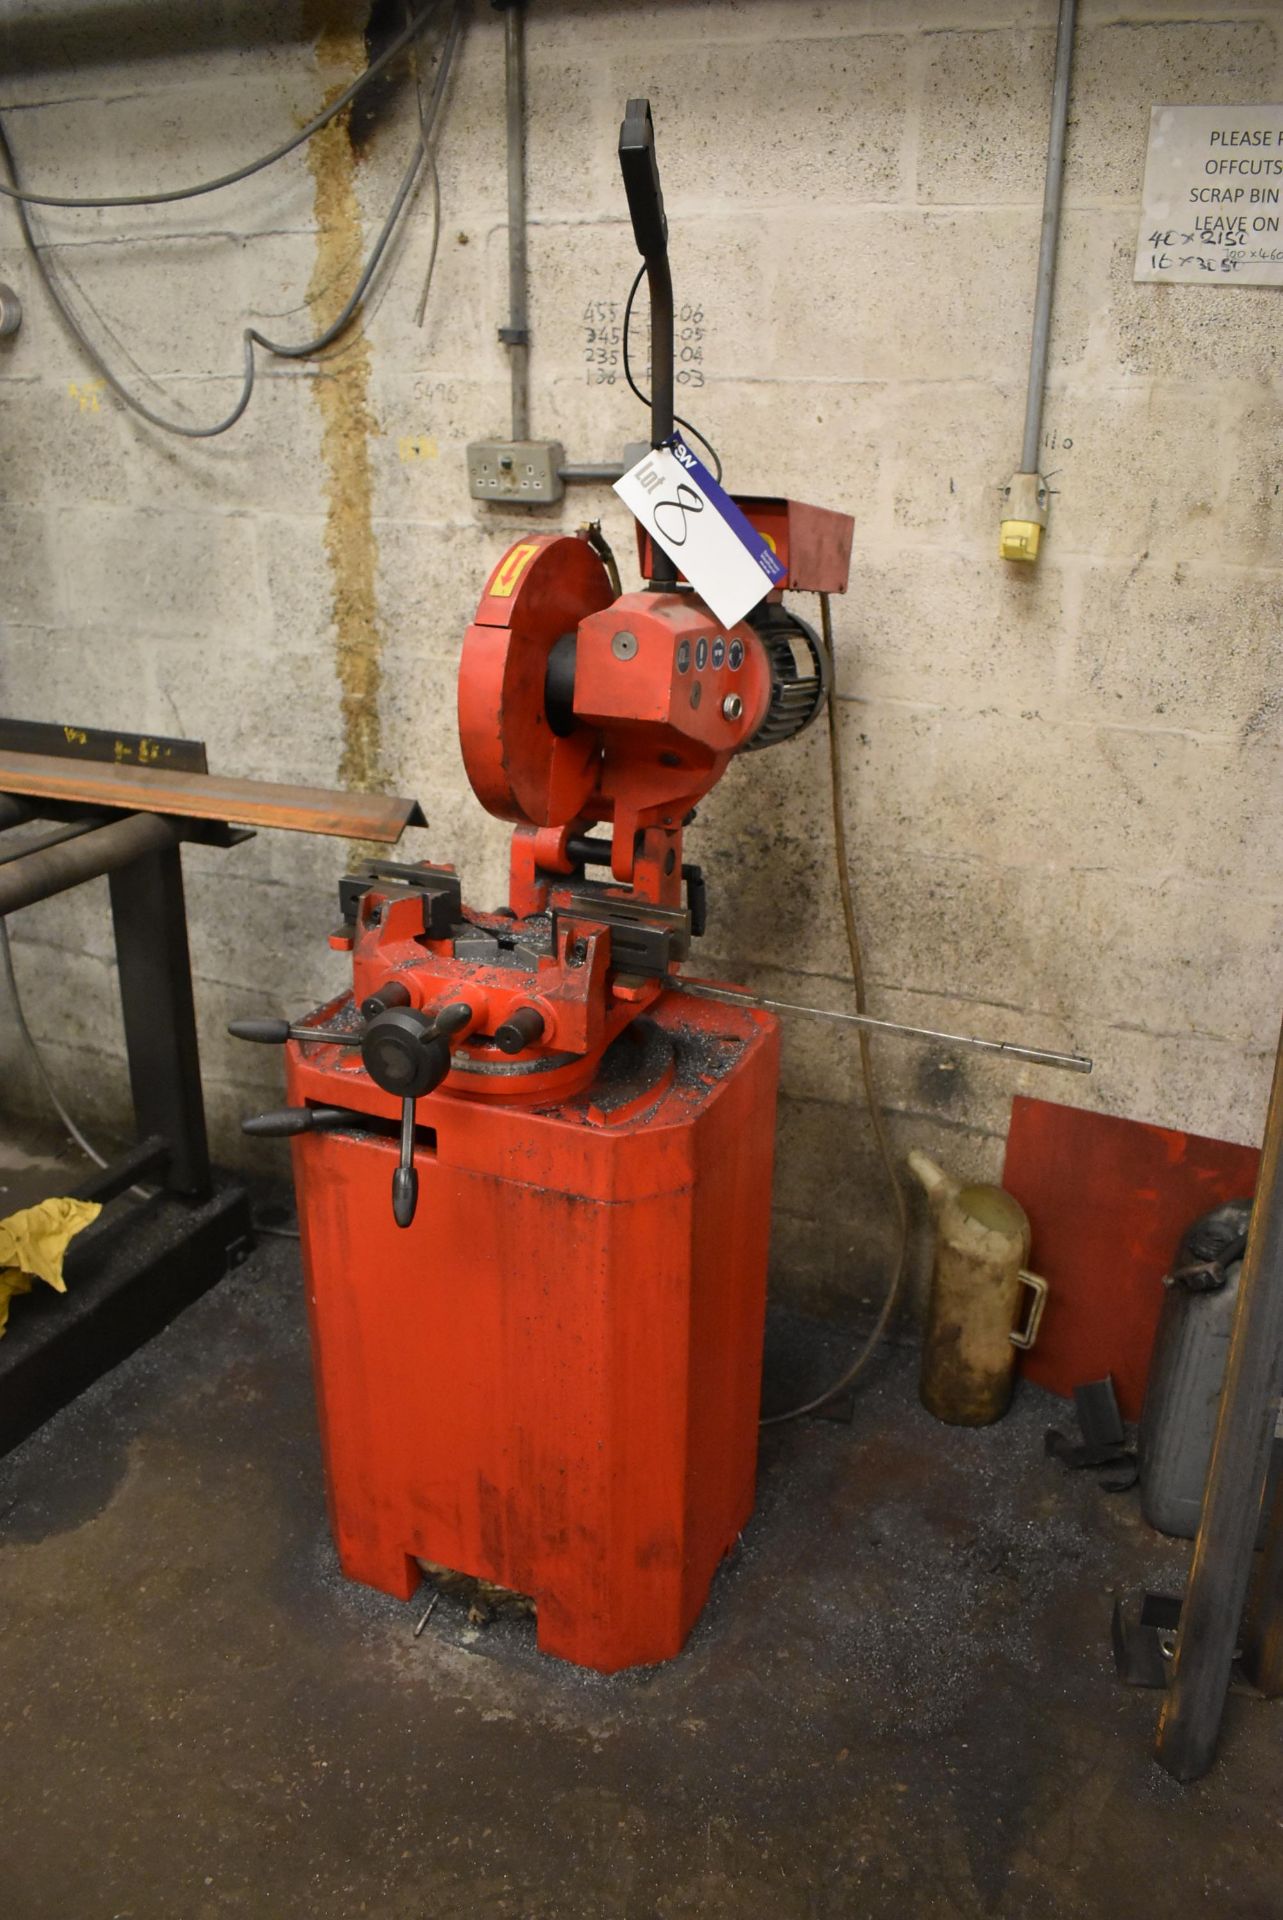 Approx. 280mm dia. Electric Cut-off Saw